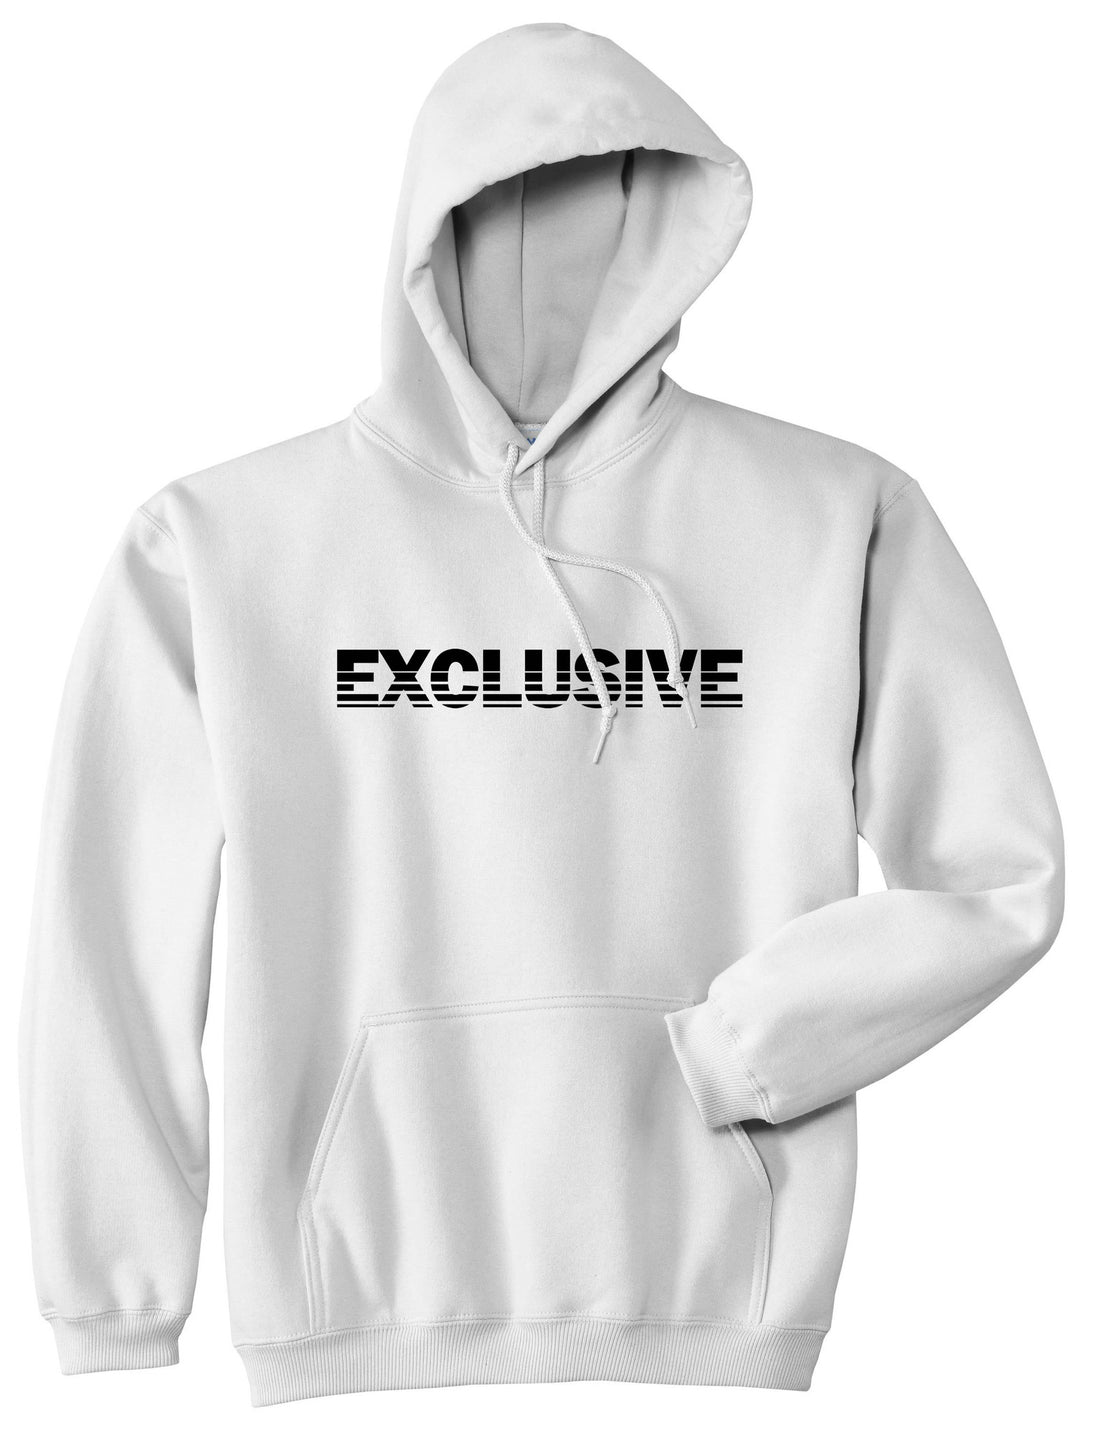 Exclusive Racing Style Pullover Hoodie Hoody in White by Kings Of NY